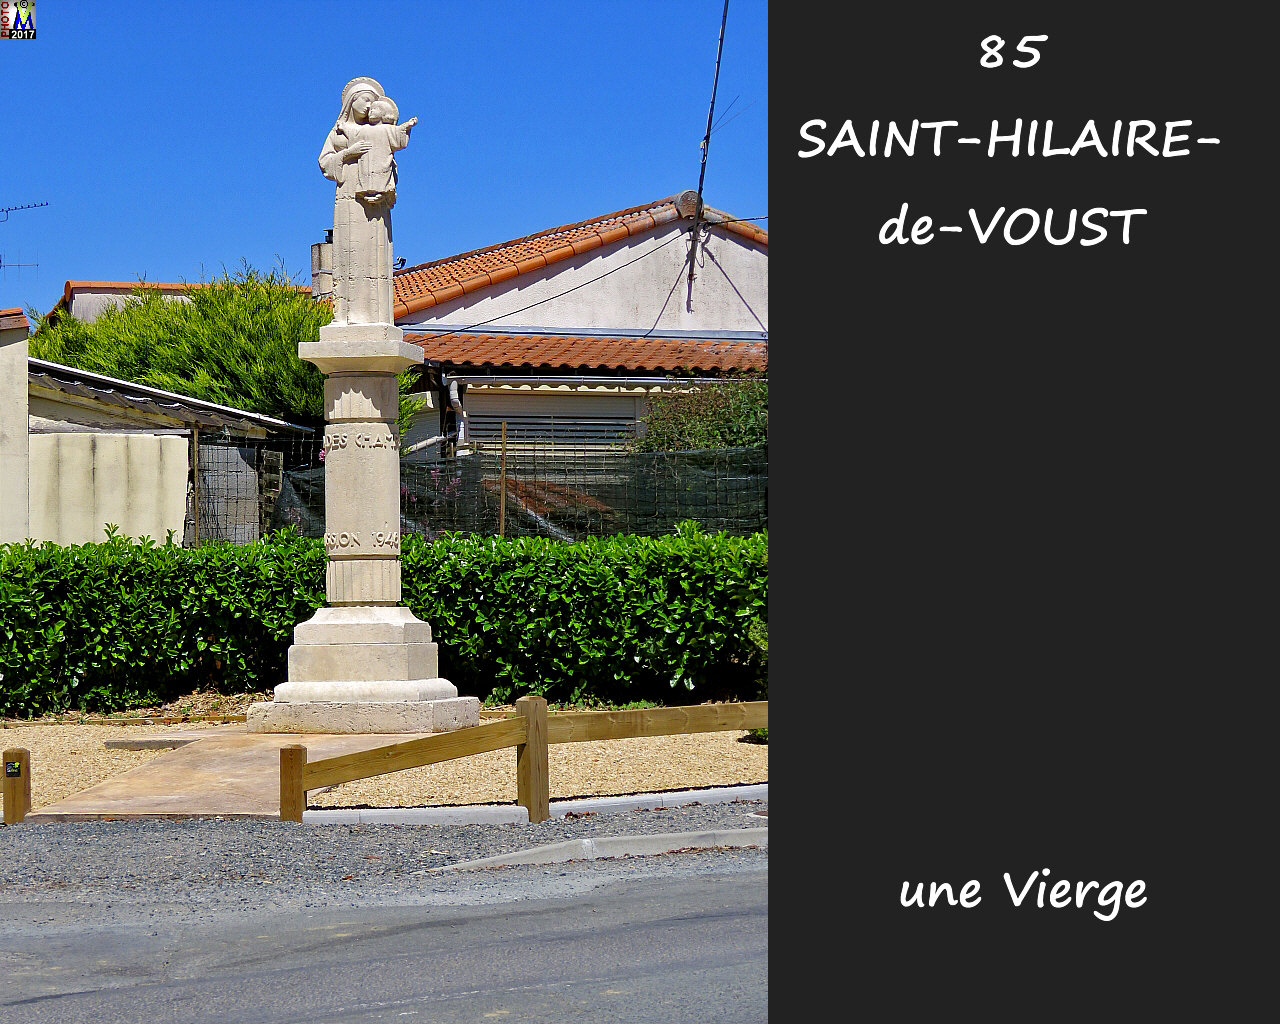 85StHILAIRE-VOUST_vierge_1000.jpg